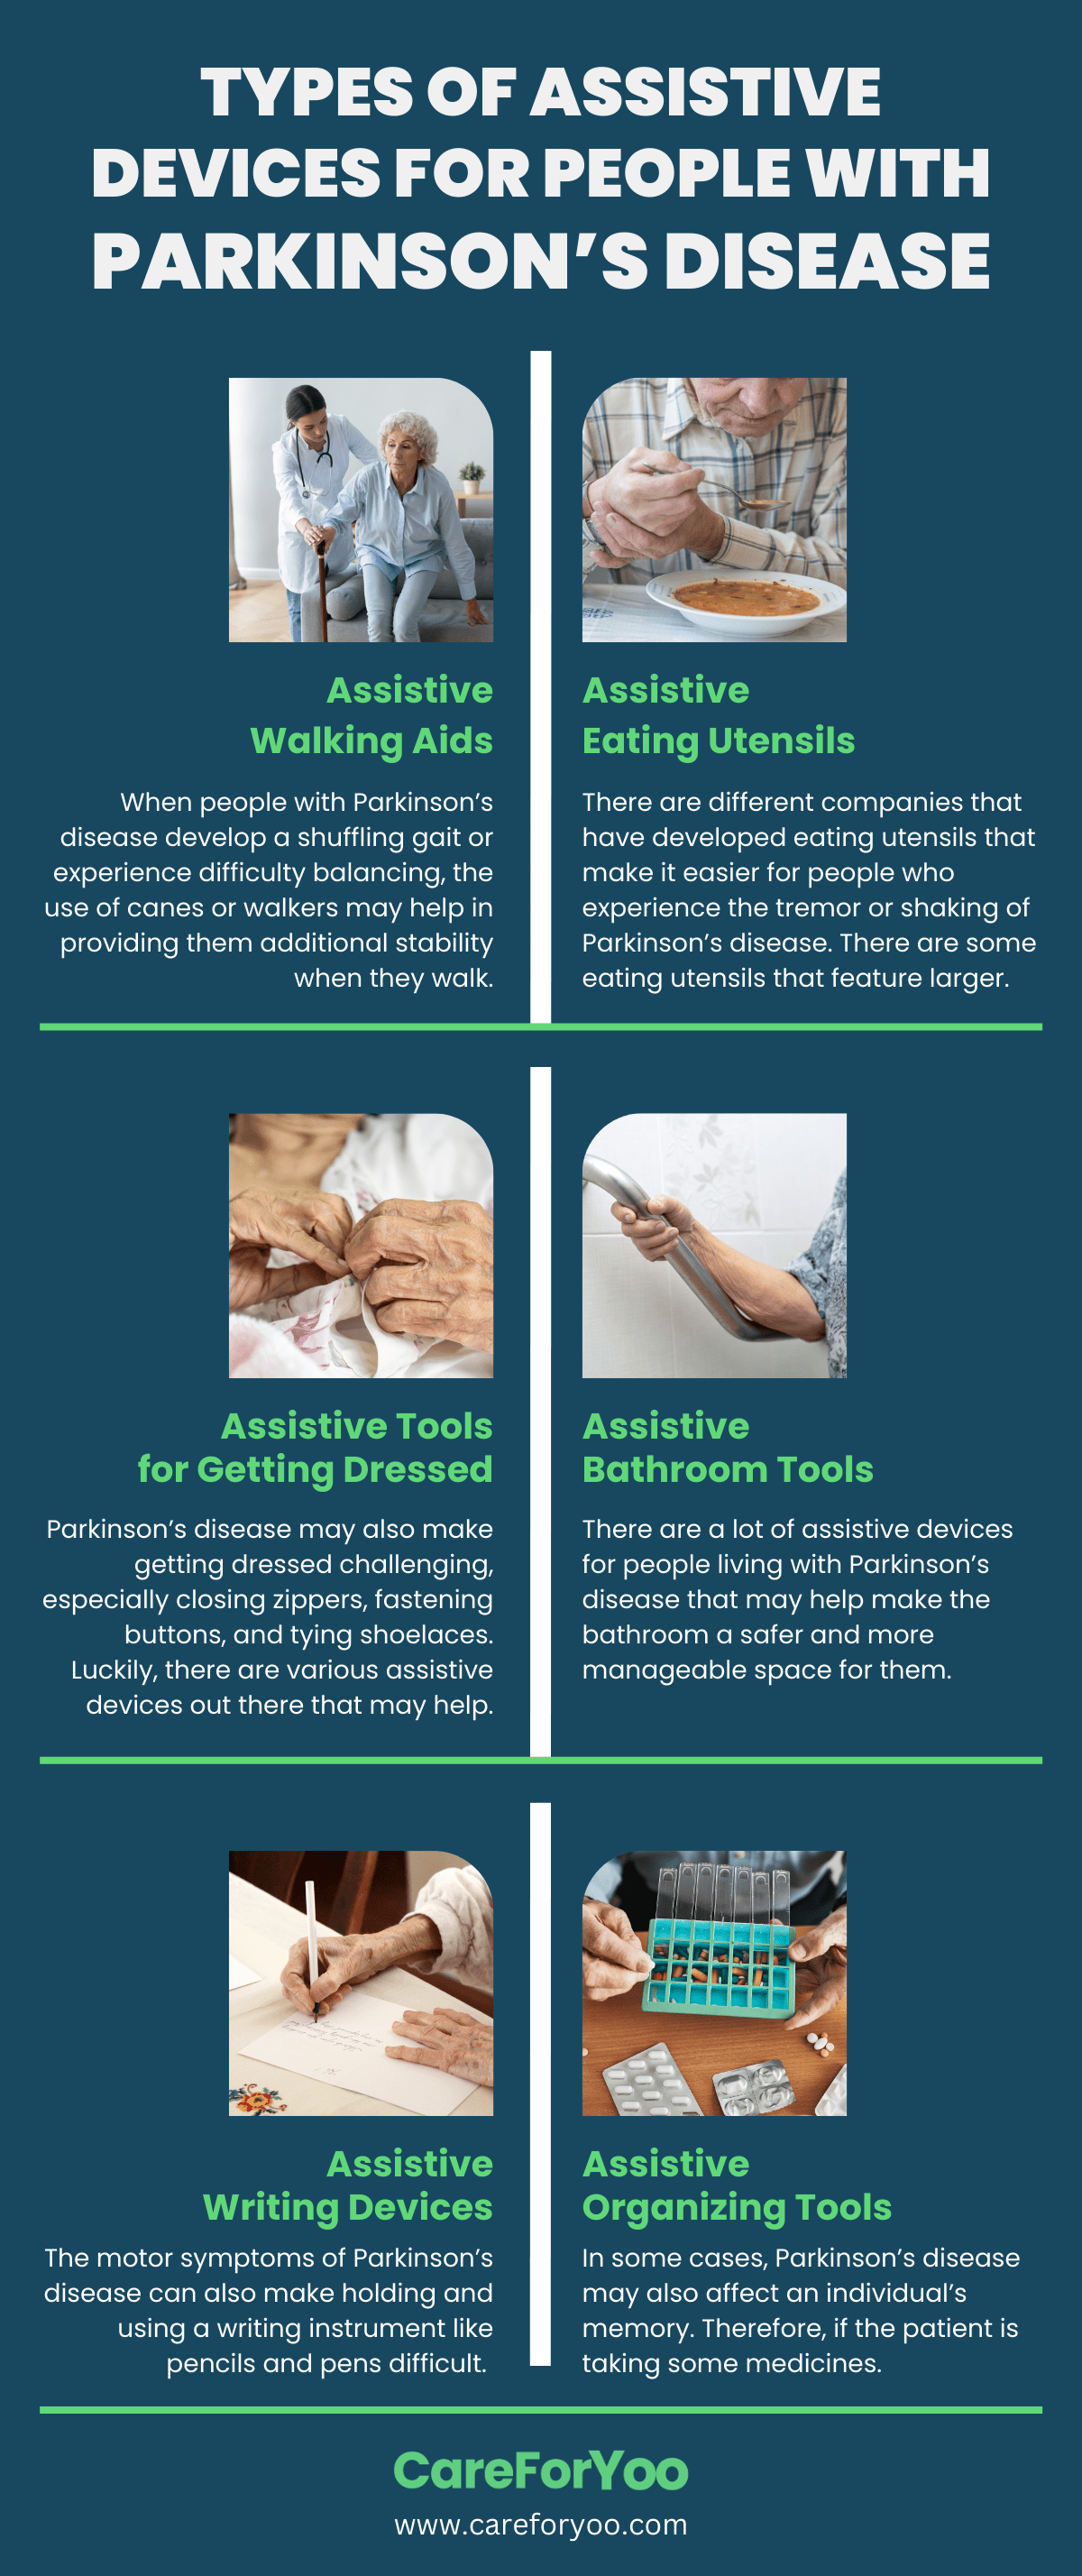 Types of Assistive Devices for People with Parkinson’s Disease